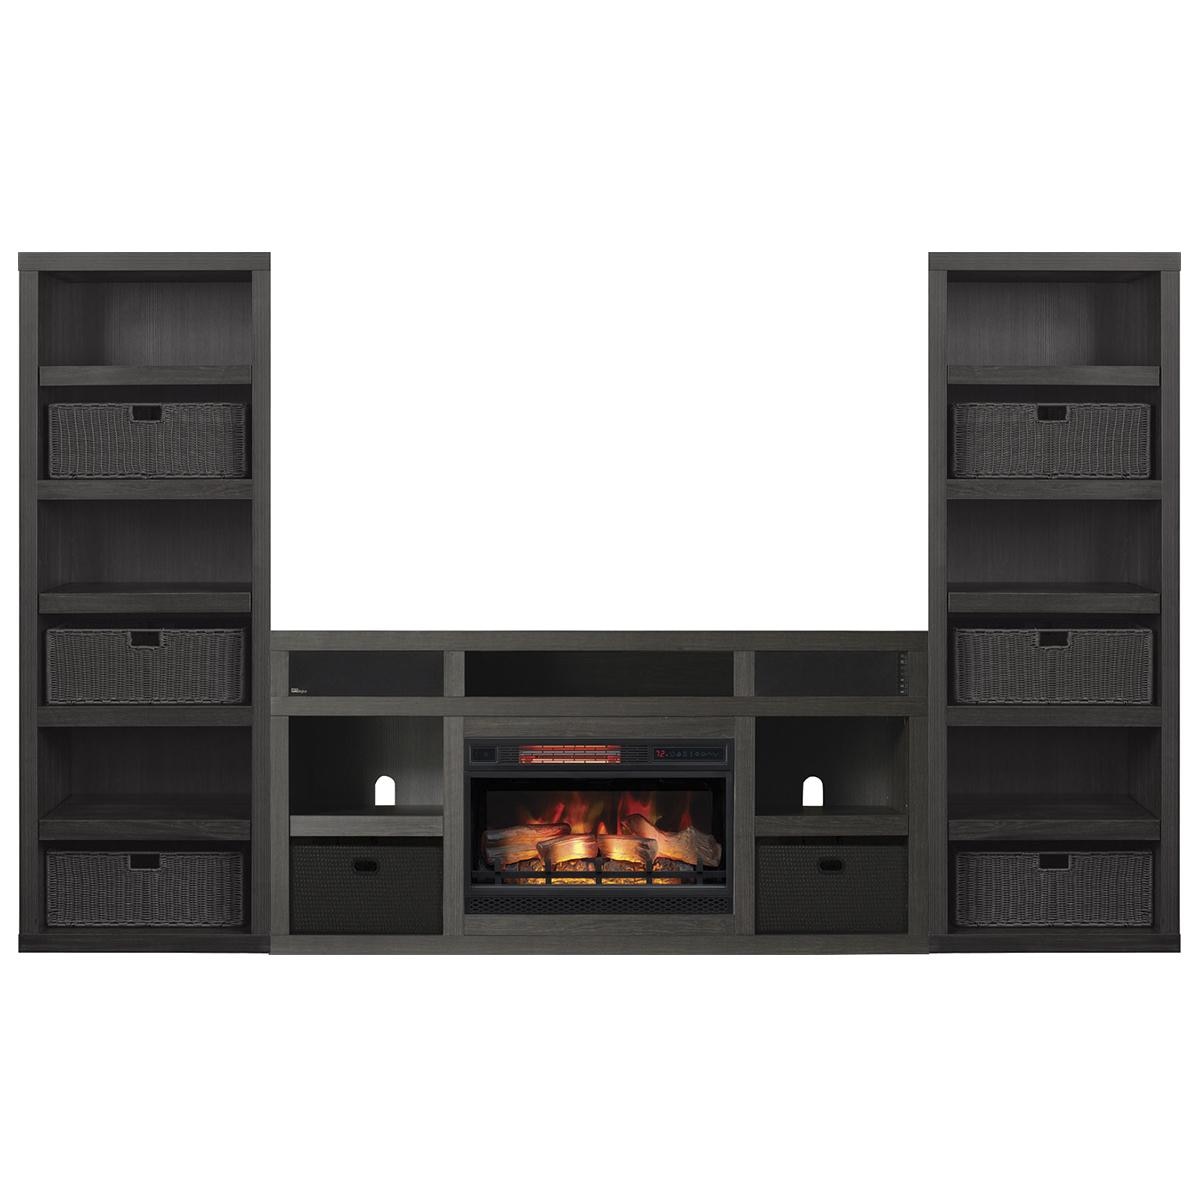 Bench In Front Of Fireplace Elegant Fabio Flames Greatlin 3 Piece Fireplace Entertainment Wall